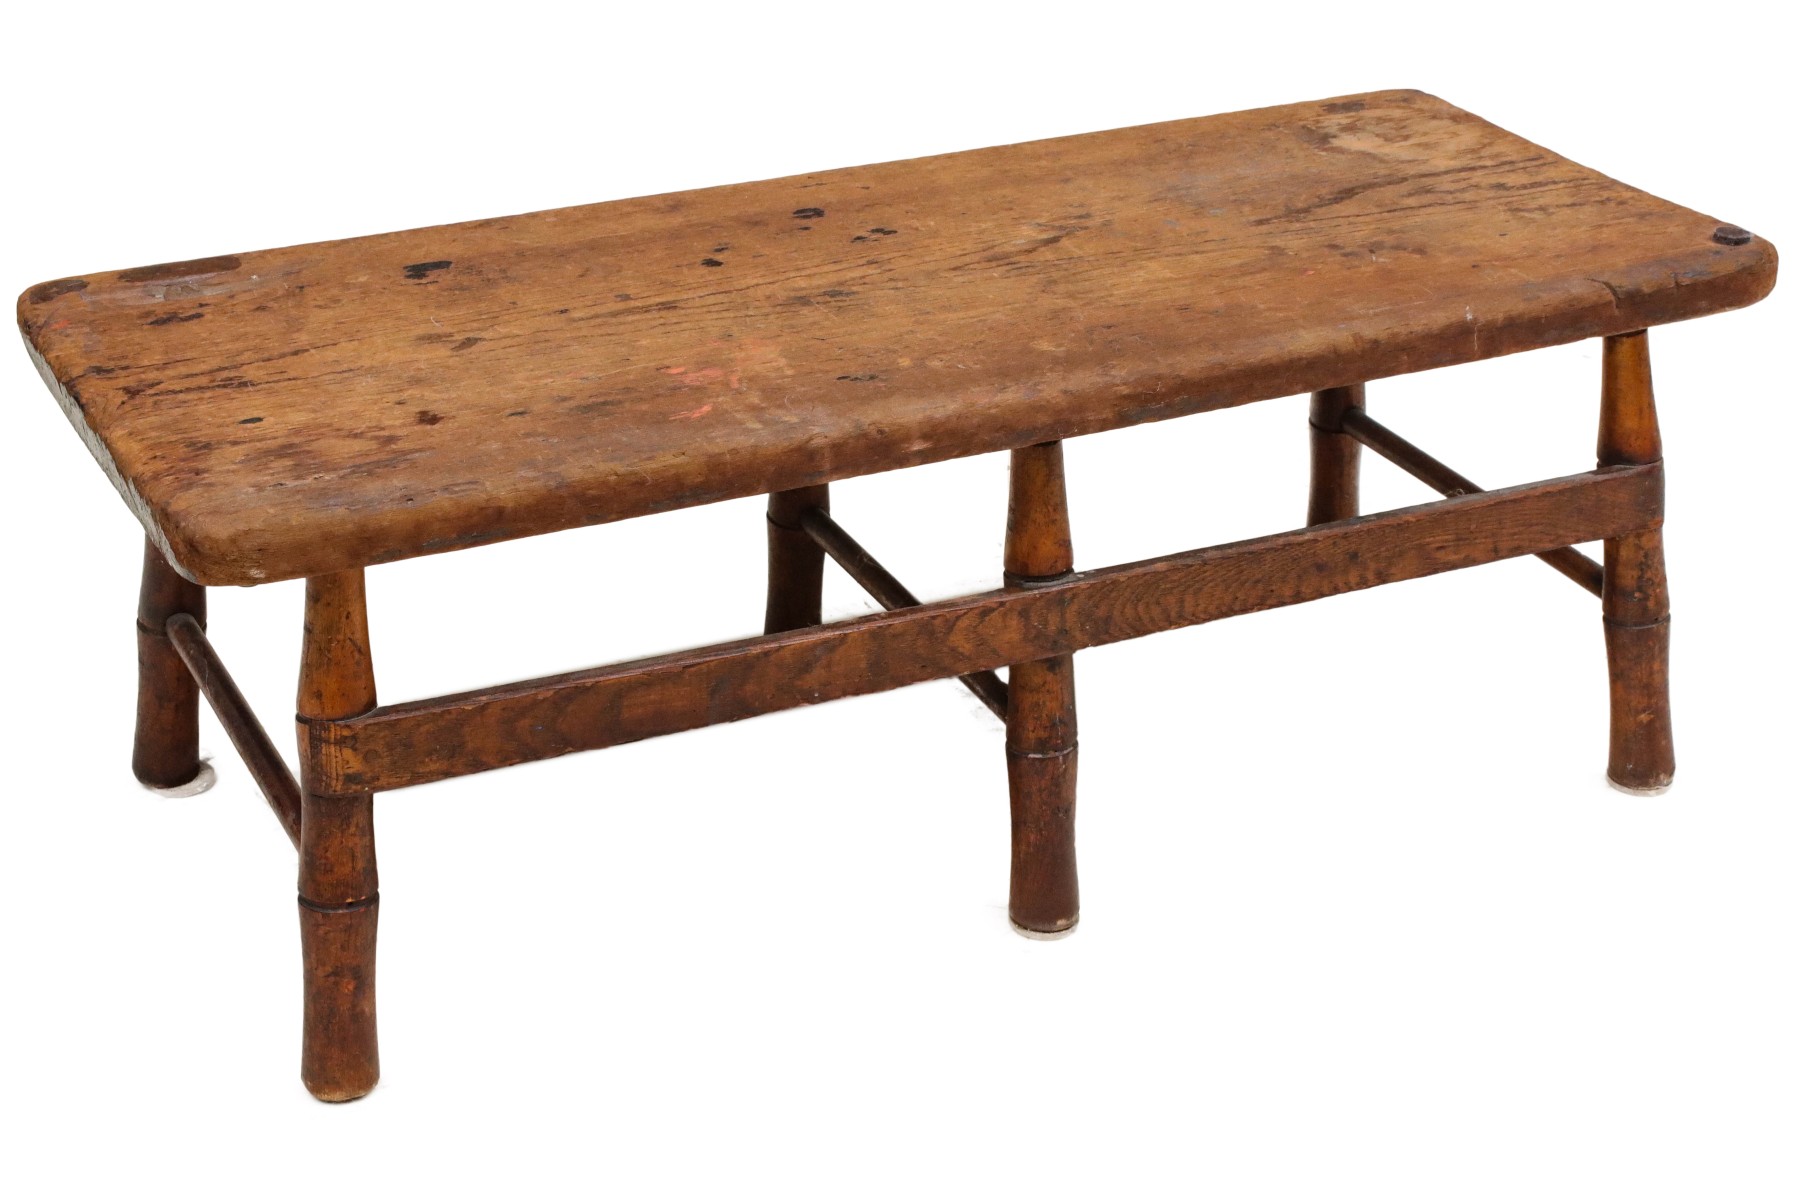 A 19TH C. WINDSOR STYLE PLANK TOP BENCH